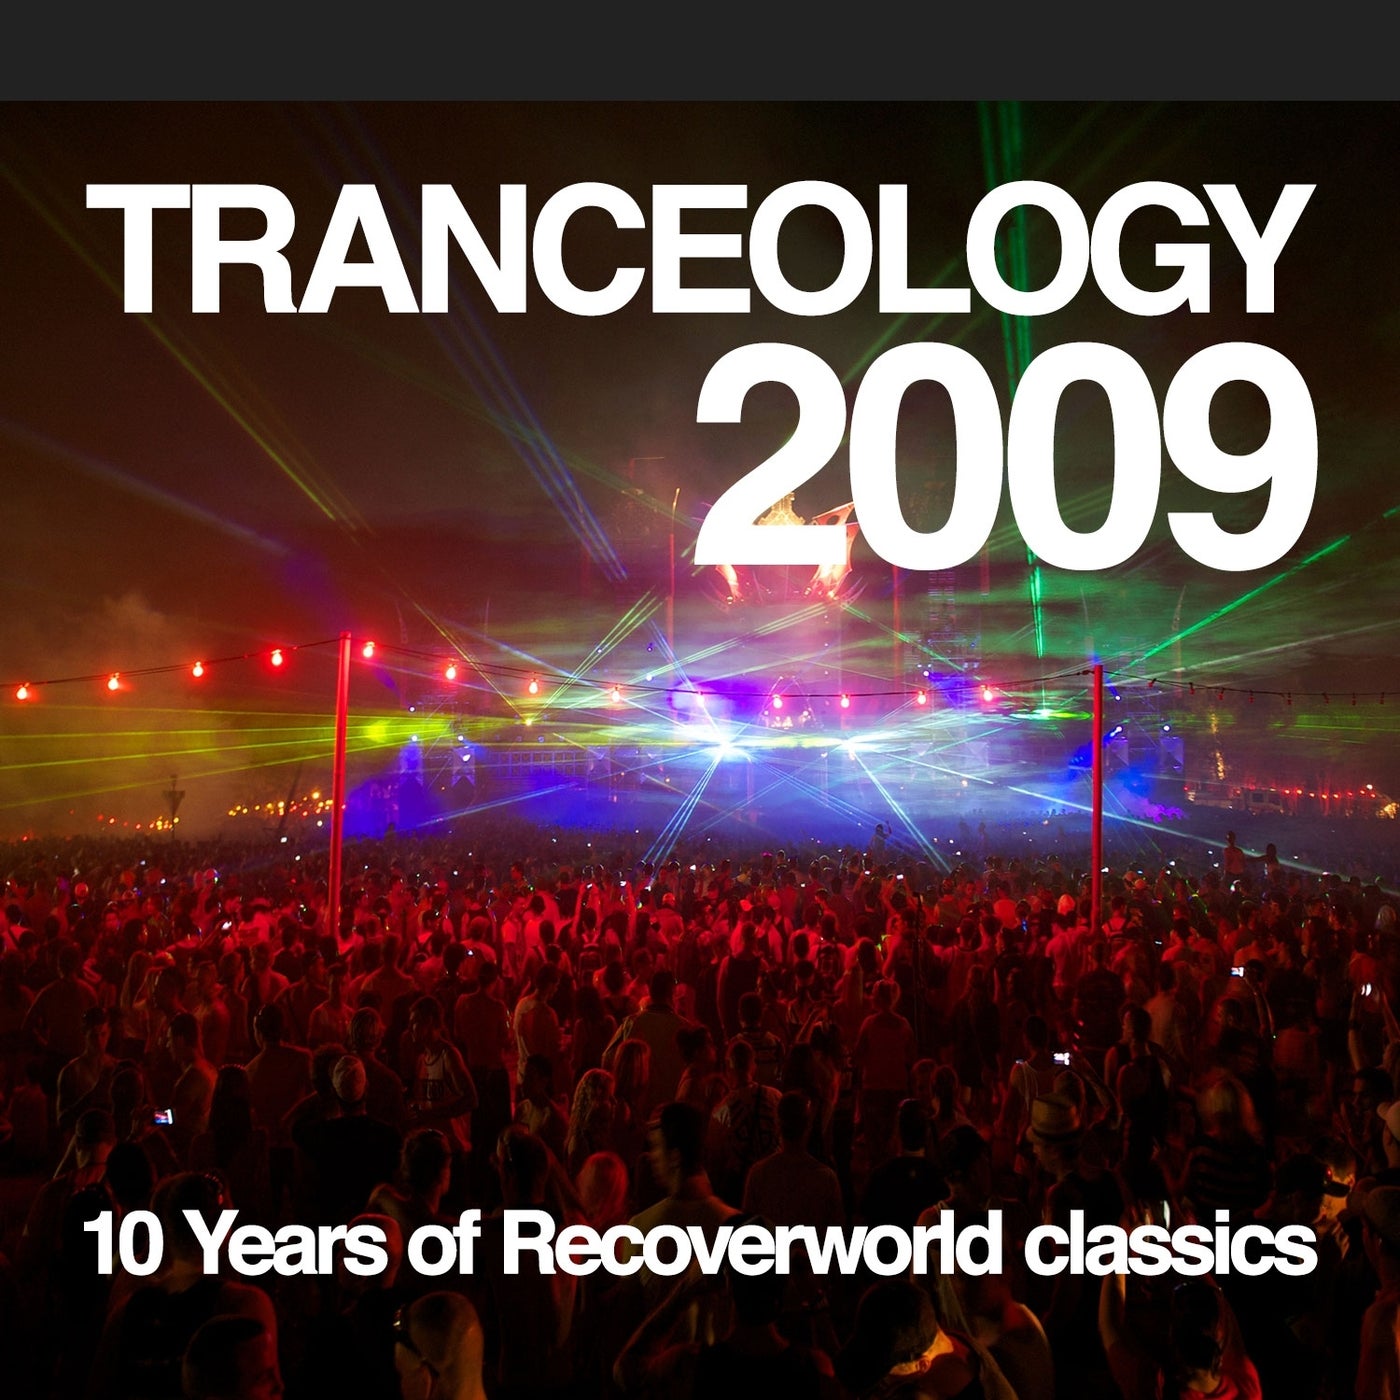 Tranceology 2009 - 10 Years of Recoverworld